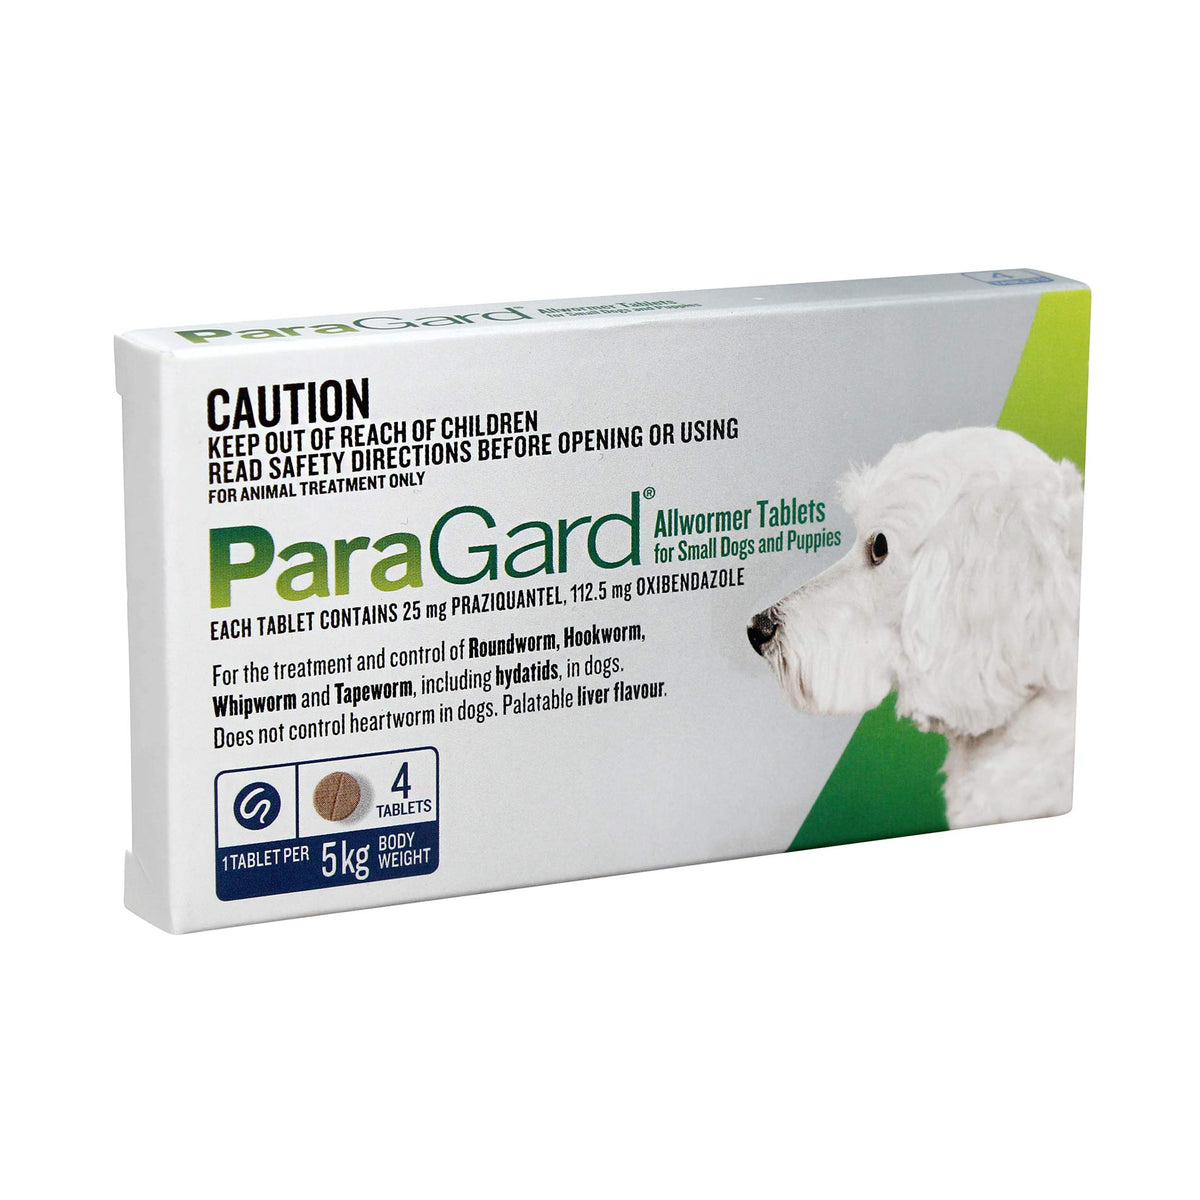 ParaGard Allwormer Tablets for Small Dogs &amp; Puppies